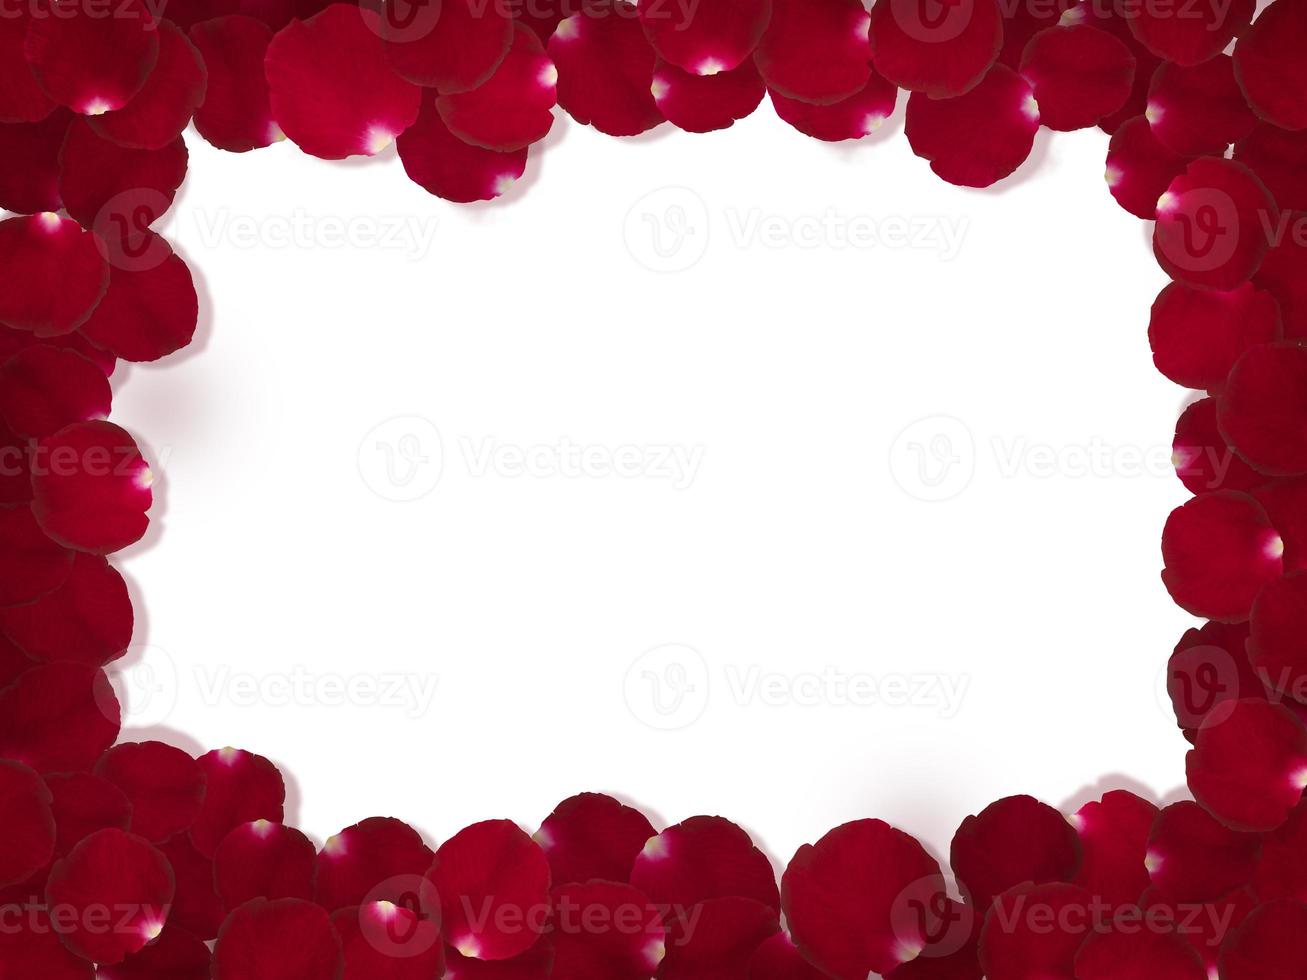 Romantic red rose petals on white background photo